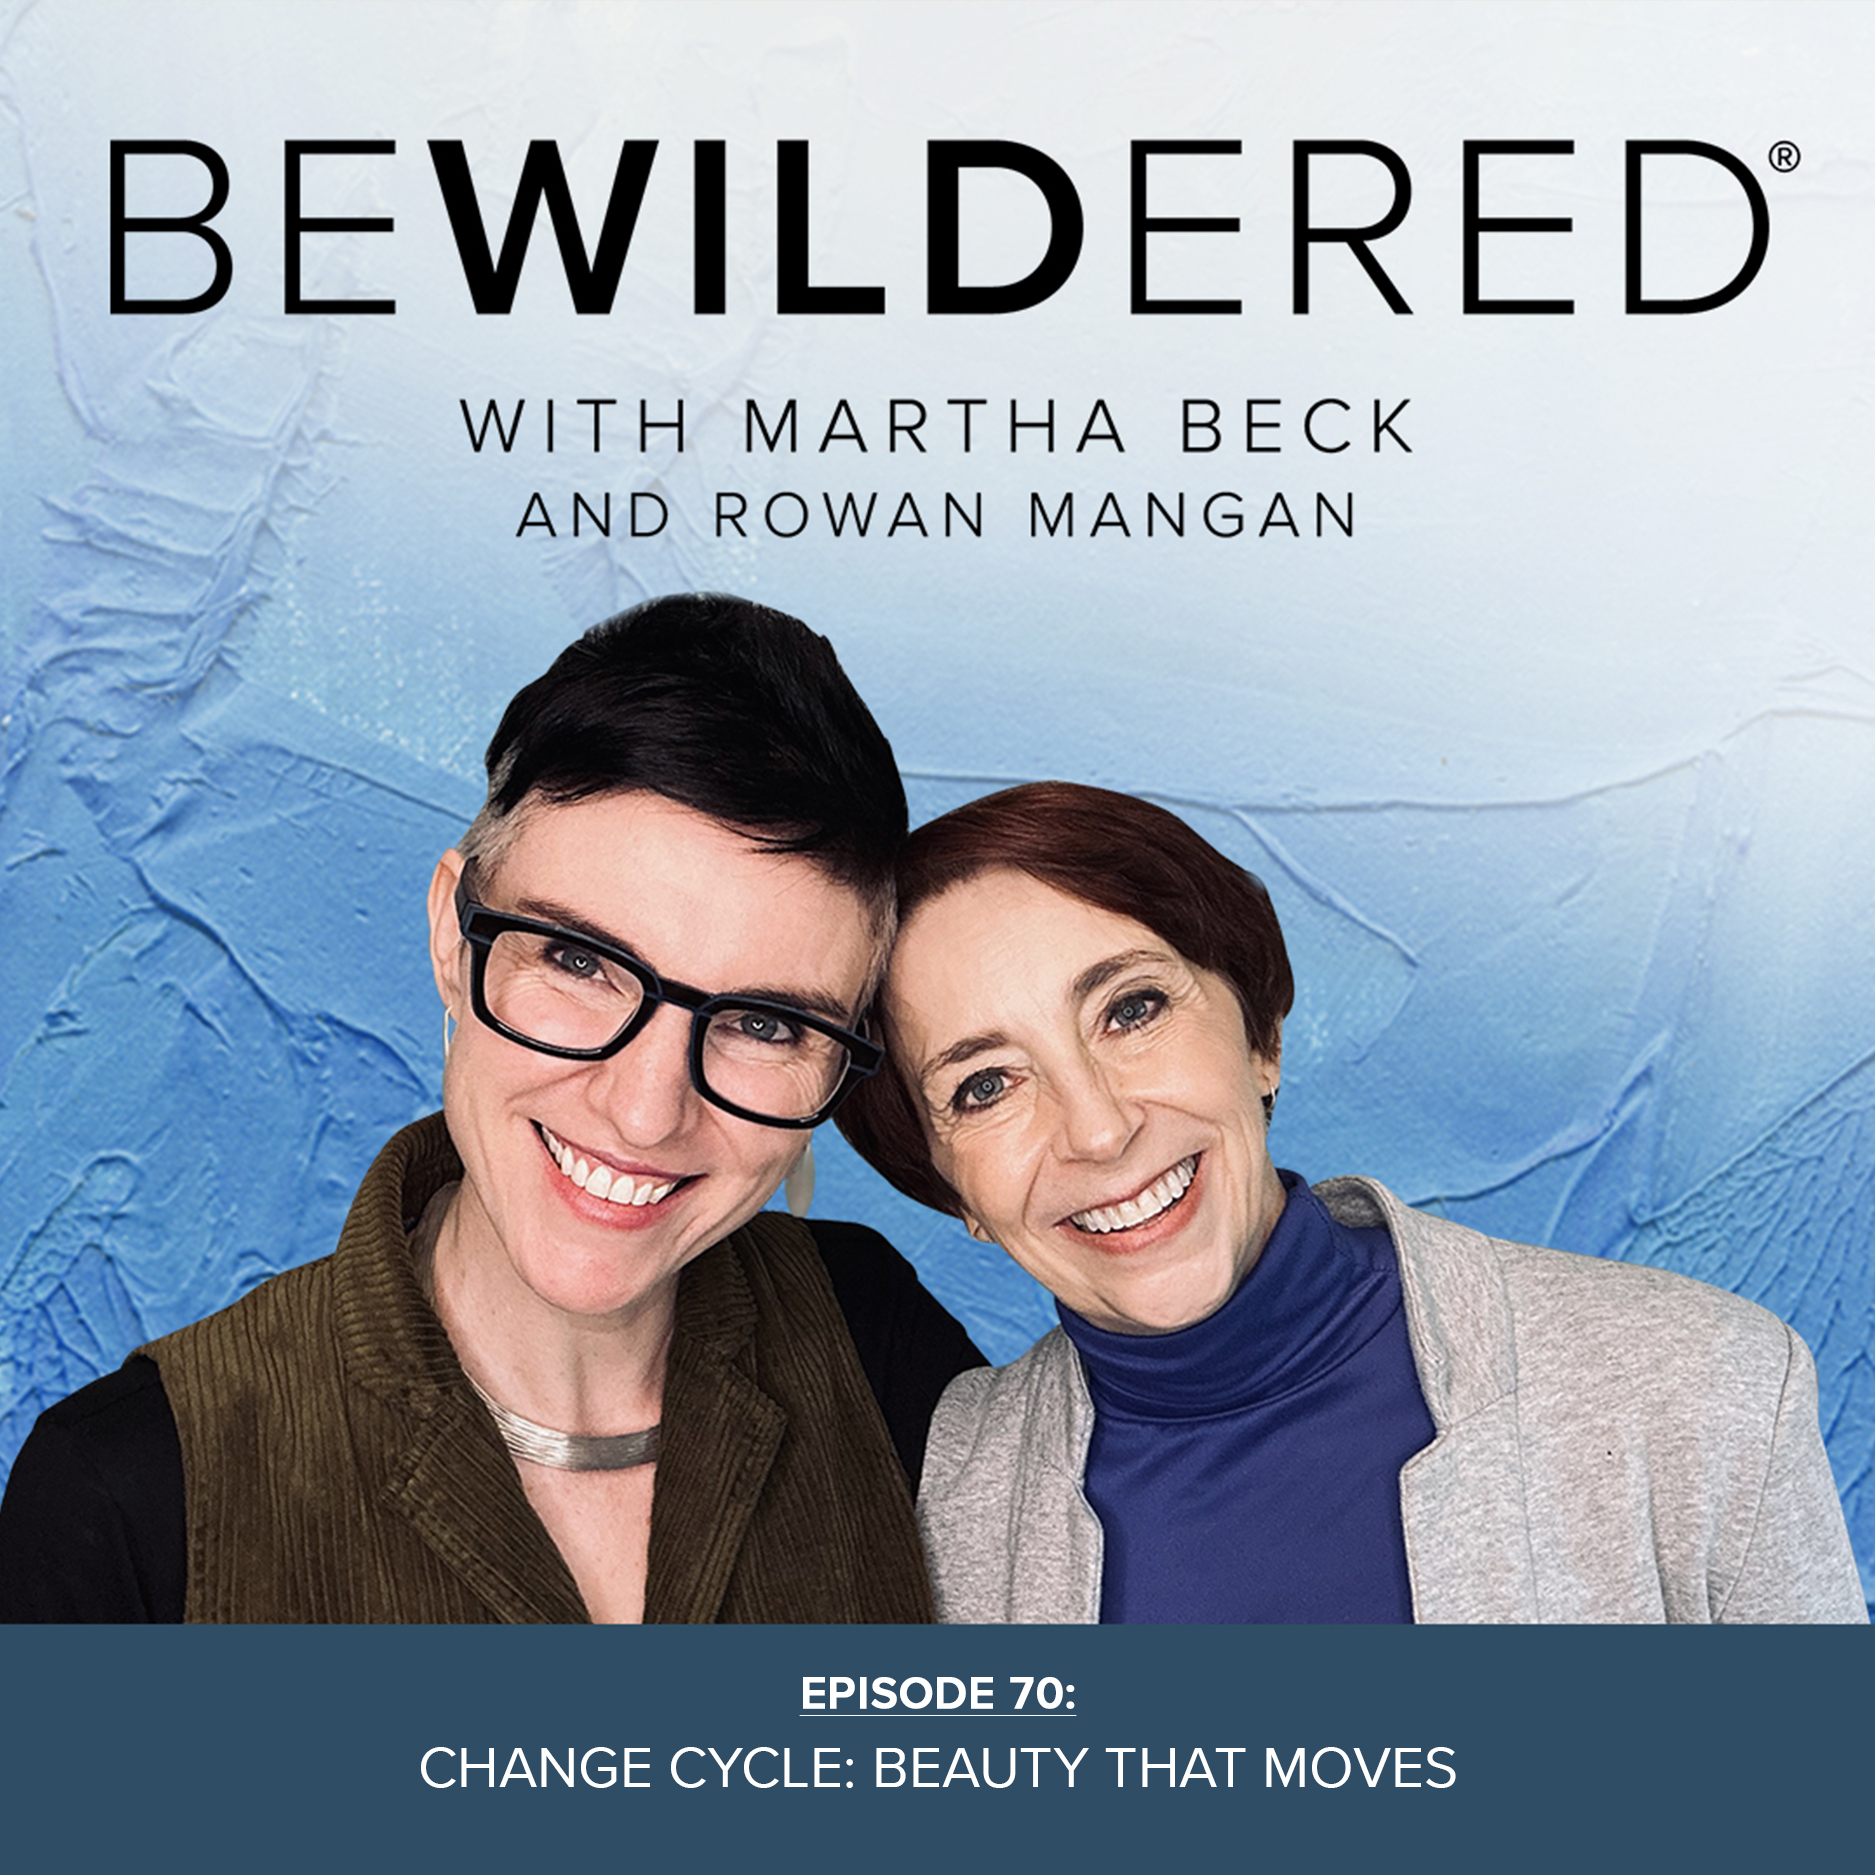 Image for Episode #70 Change Cycle: Beauty That Moves for the Bewildered Podcast with Martha Beck and Rowan Mangan